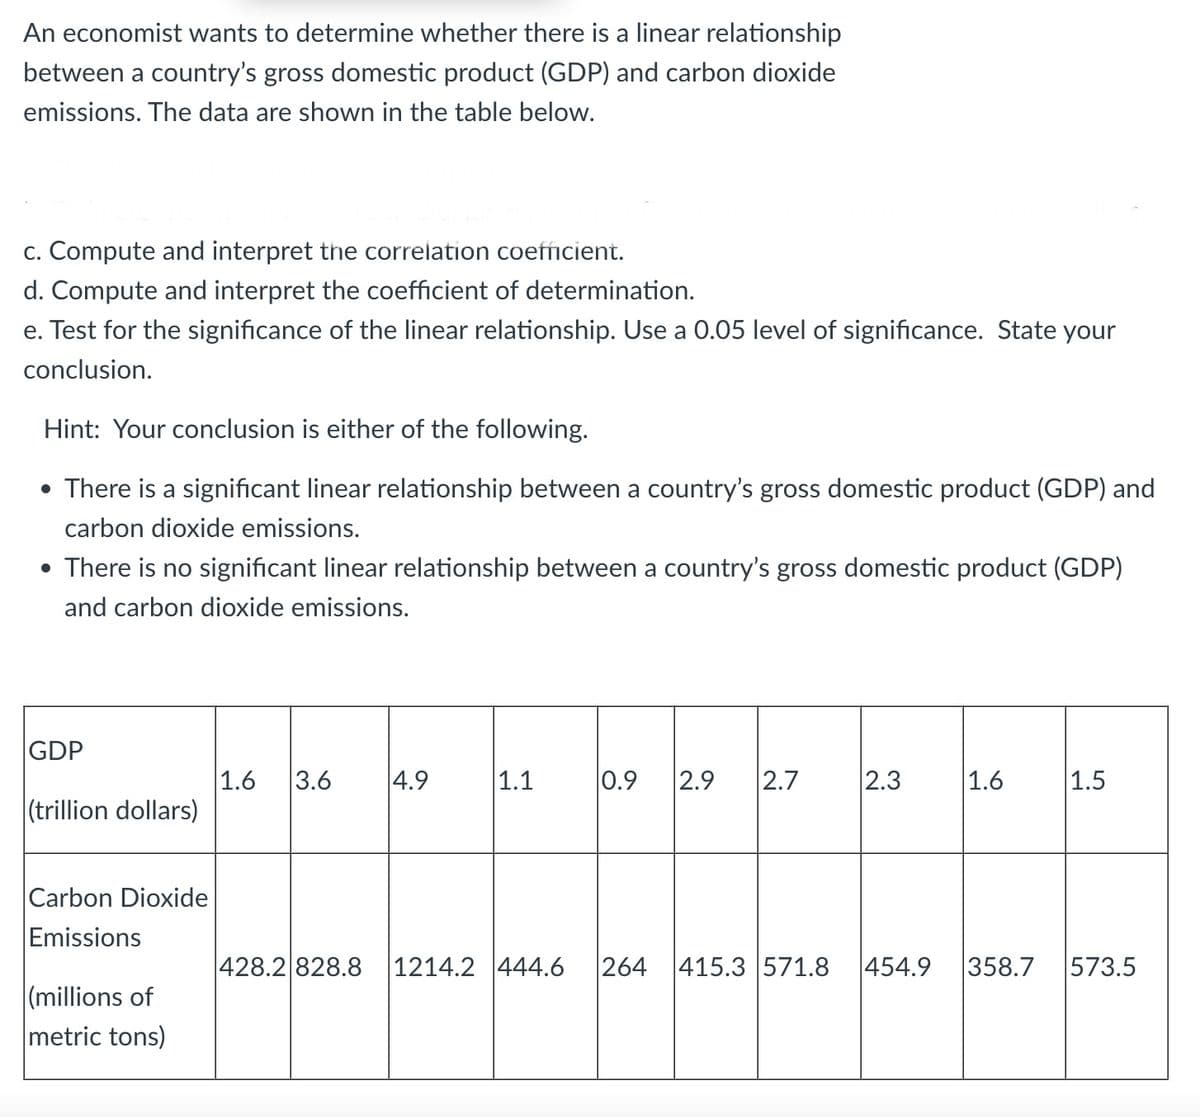 An economist wants to determine whether there is a linear relationship
between a country's gross domestic product (GDP) and carbon dioxide
emissions. The data are shown in the table below.
c. Compute and interpret the correlation coefficient.
d. Compute and interpret the coefficient of determination.
e. Test for the significance of the linear relationship. Use a 0.05 level of significance. State your
conclusion.
Hint: Your conclusion is either of the following.
• There is a significant linear relationship between a country's gross domestic product (GDP) and
carbon dioxide emissions.
• There is no significant linear relationship between a country's gross domestic product (GDP)
and carbon dioxide emissions.
GDP
1.6 3.6
4.9
1.1
0.9 2.9 2.7
2.3
1.6
1.5
(trillion dollars)
Carbon Dioxide
Emissions
428.2 828.8 1214.2 444.6 264 415.3 571.8 454.9 358.7 573.5
(millions of
metric tons)